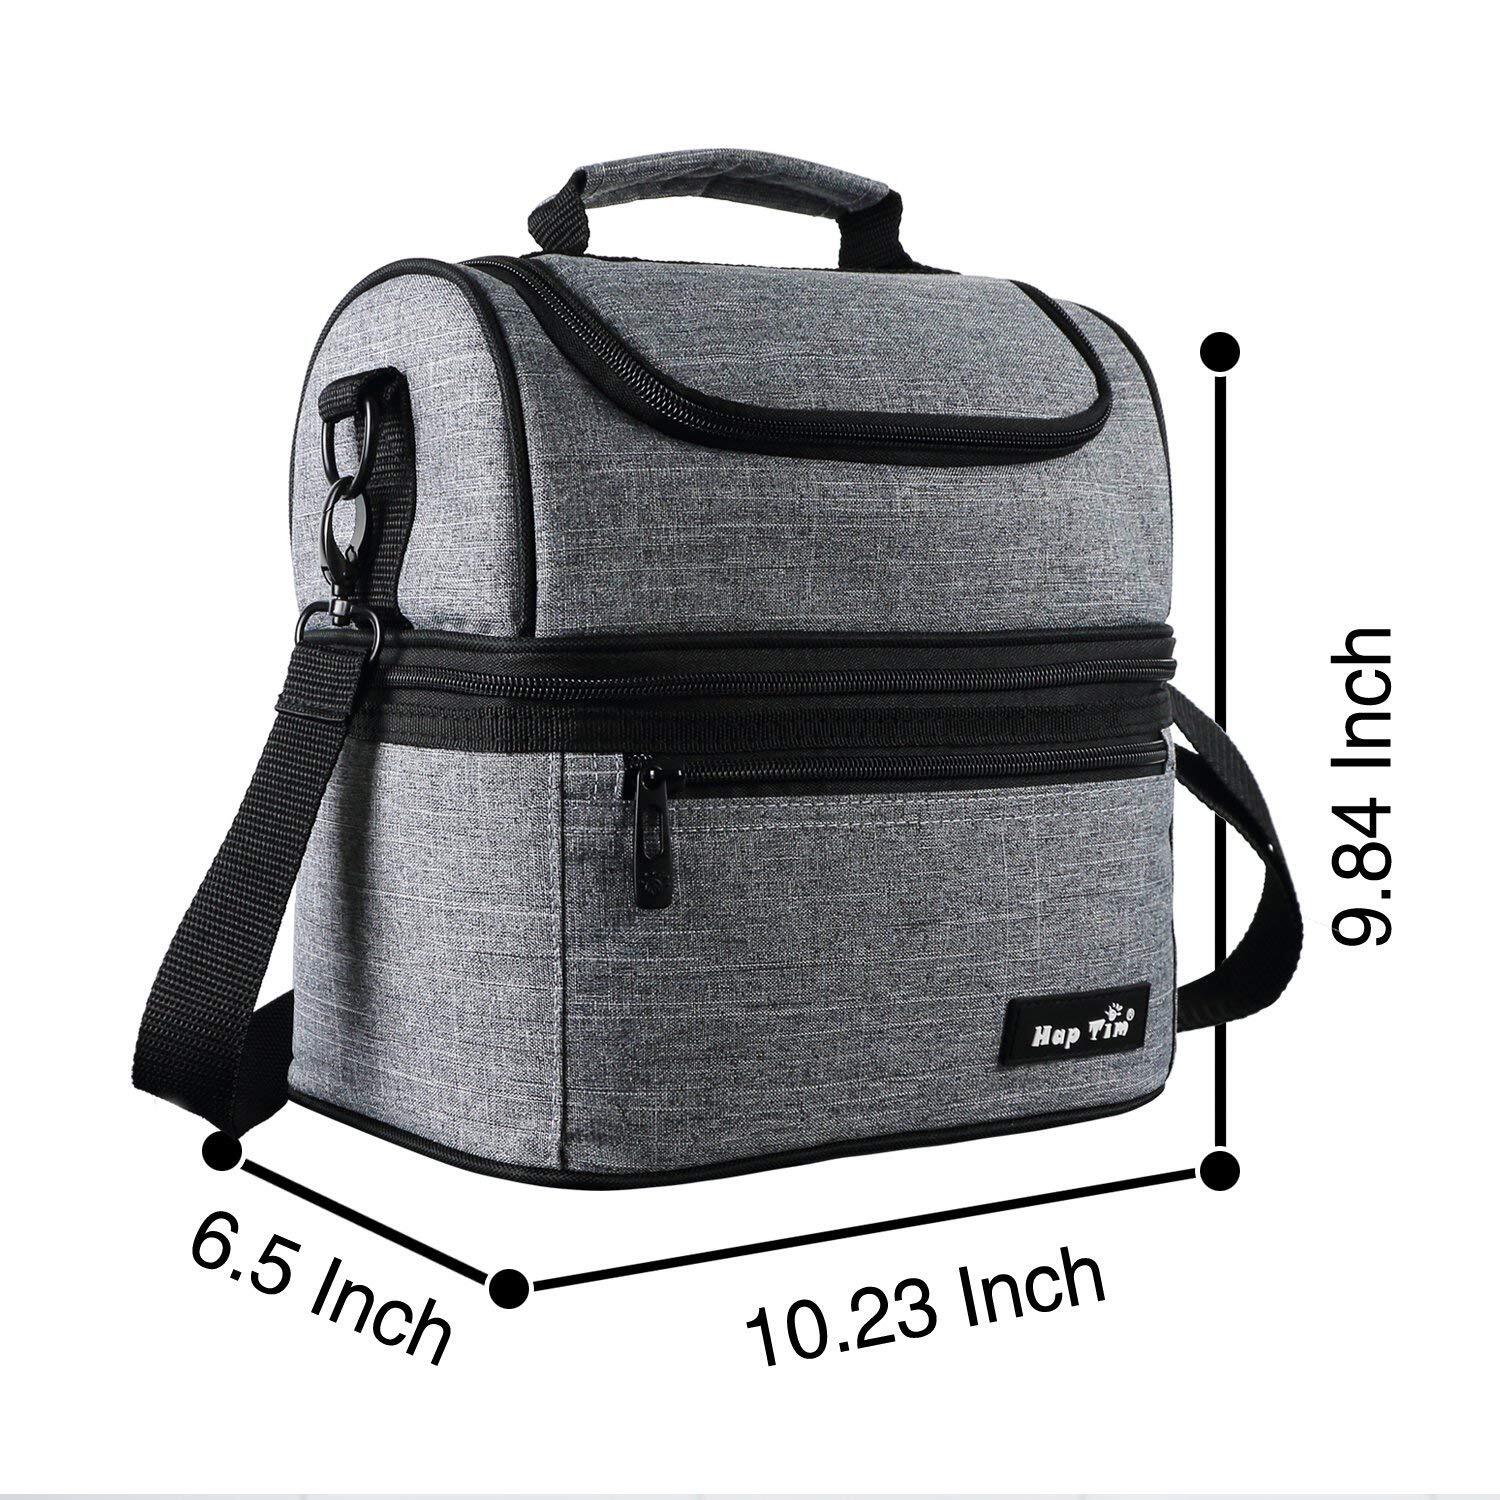 https://images.51microshop.com/1658/product/20180927/Hap_Tim_Lunch_Box_Insulated_Lunch_Bag_Large_Cooler_Tote_Bag_16040_G__1538017309105_2.jpg